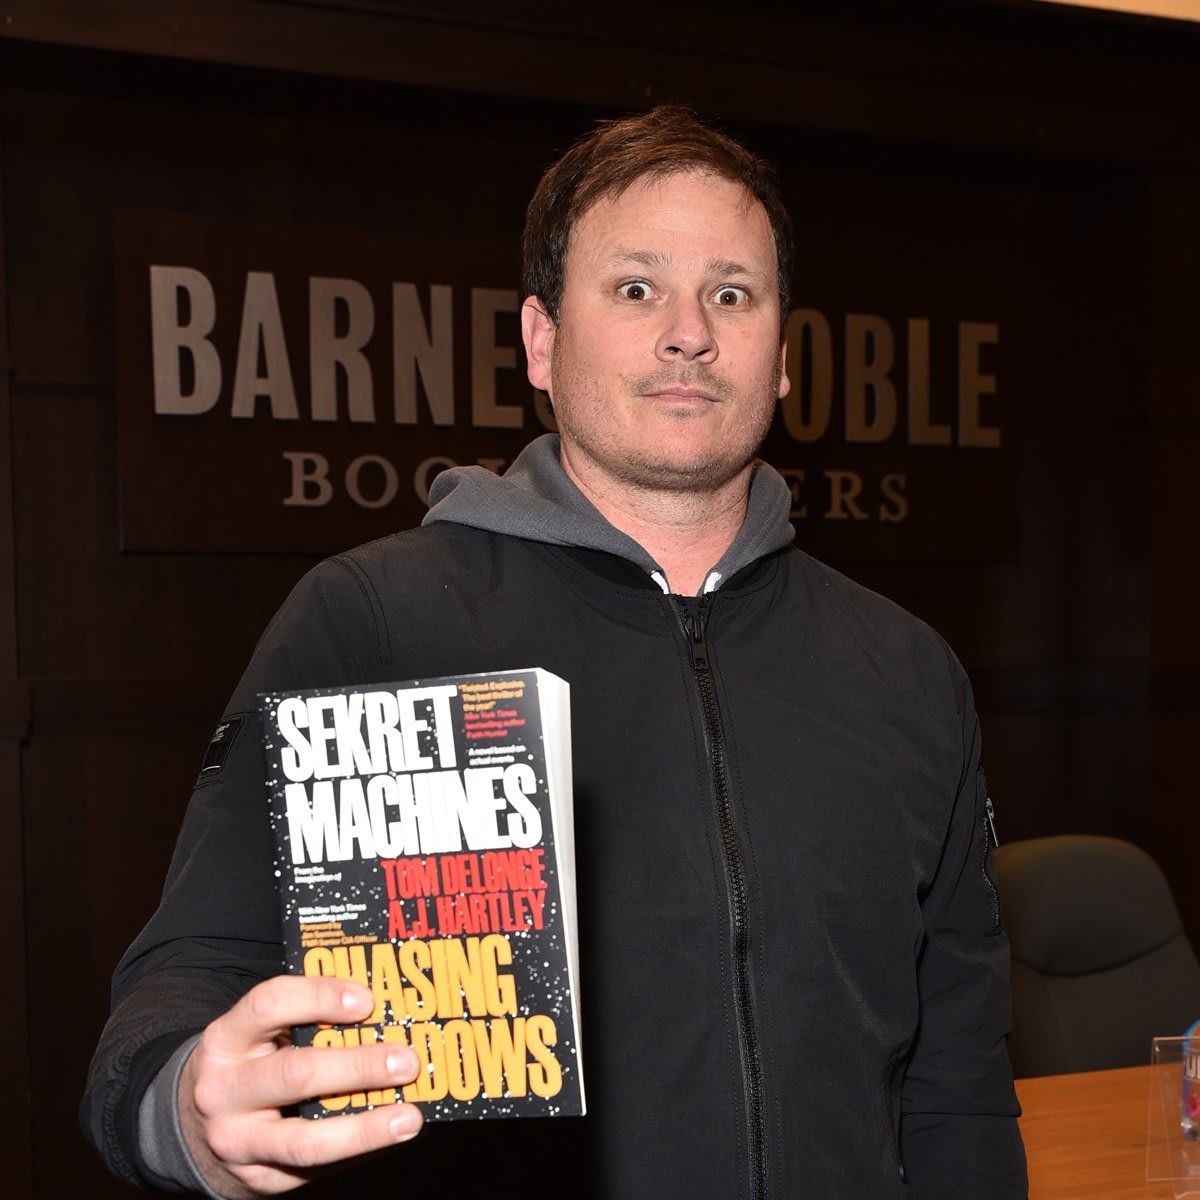 Tom Delonge And AJ Hartley Sign And Discuss Their New Novel "Sekret Machines"